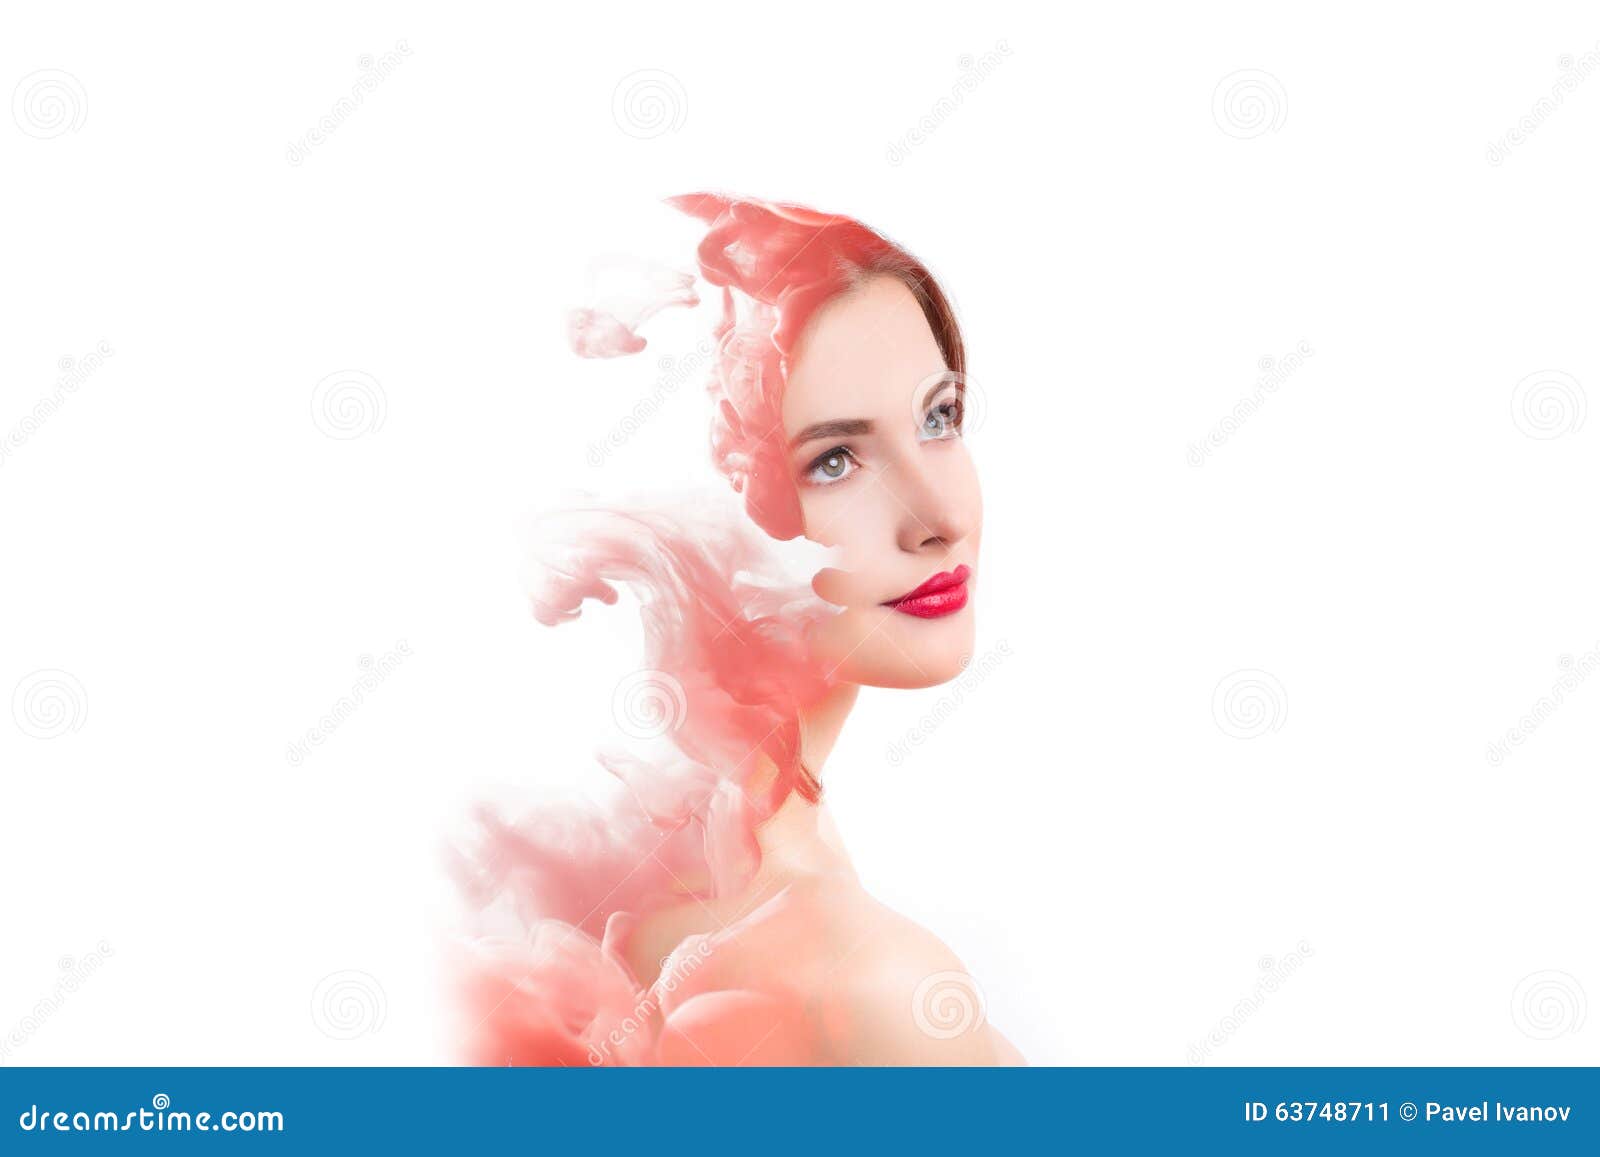 double exposure woman and cloud of red smoke.